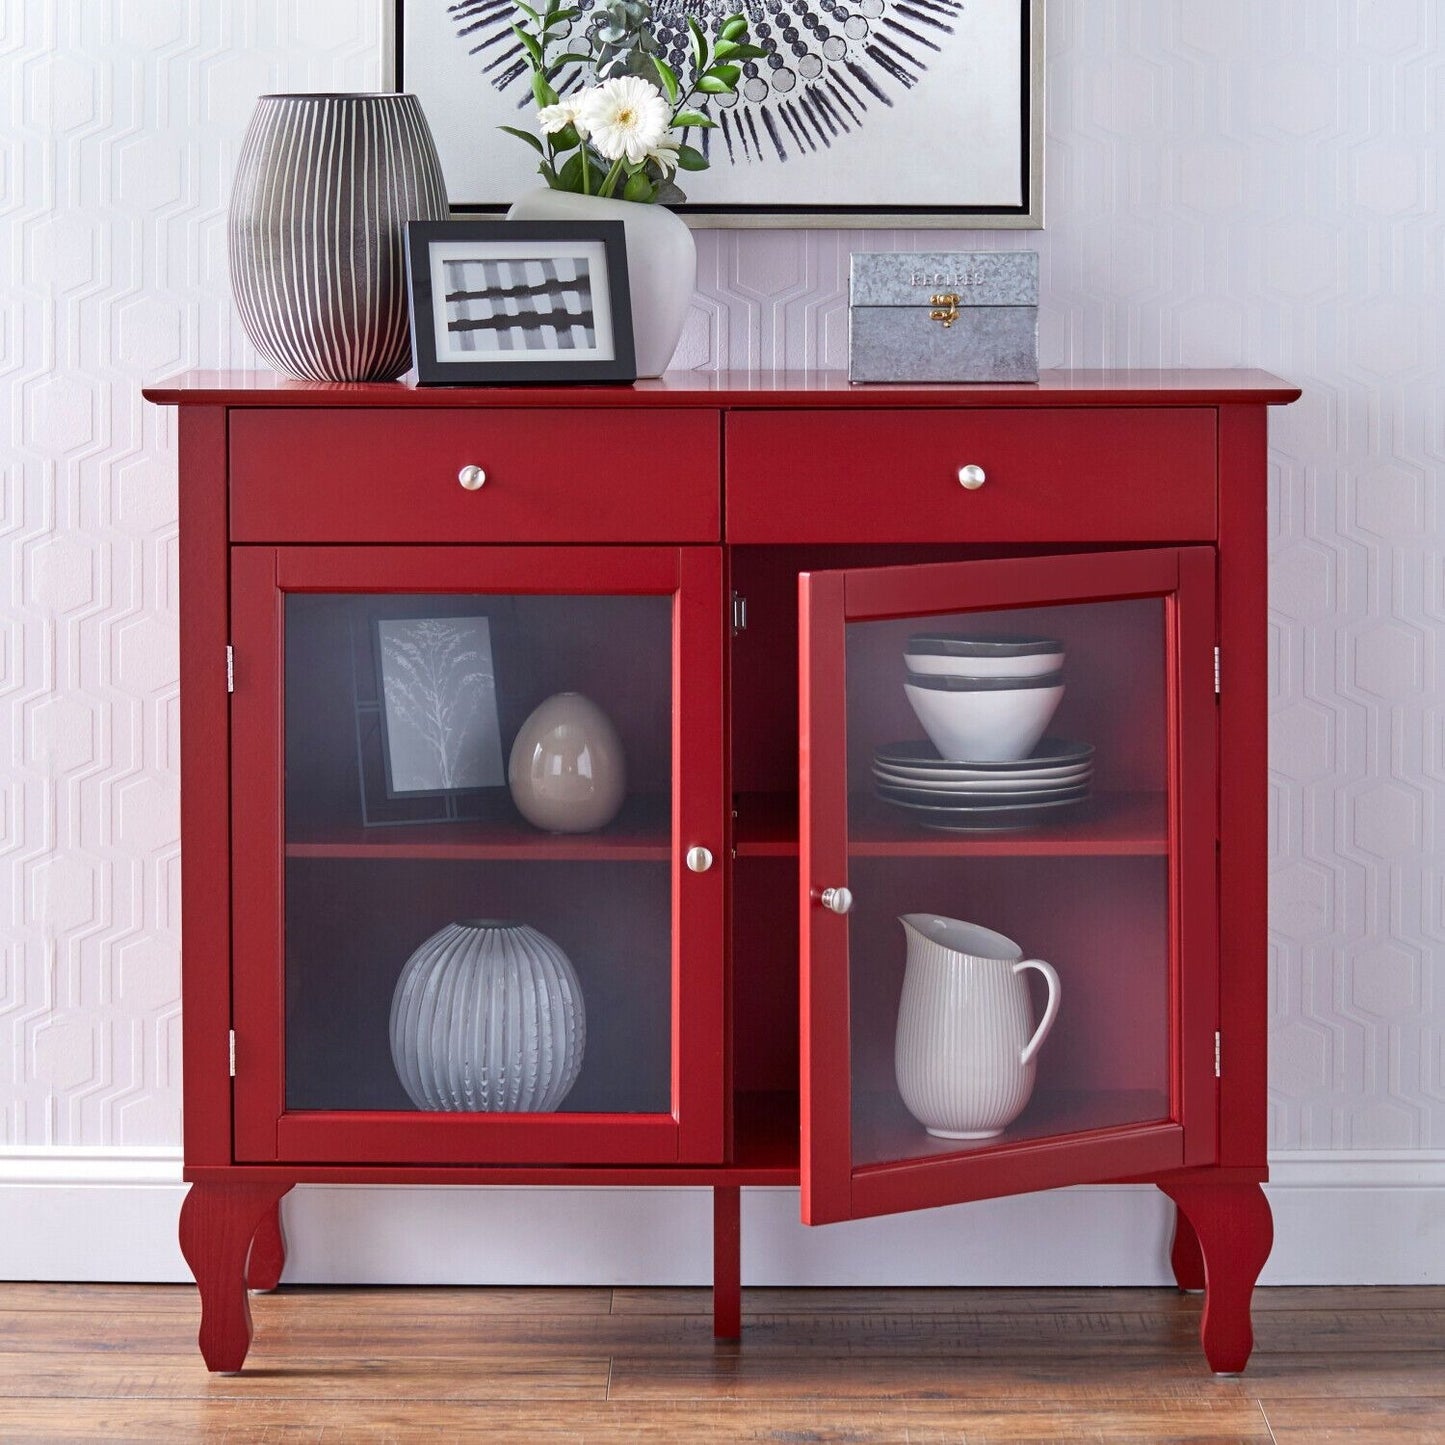 Wood Buffet Storage Display Cabinet w/ Glass Doors in Red Finish